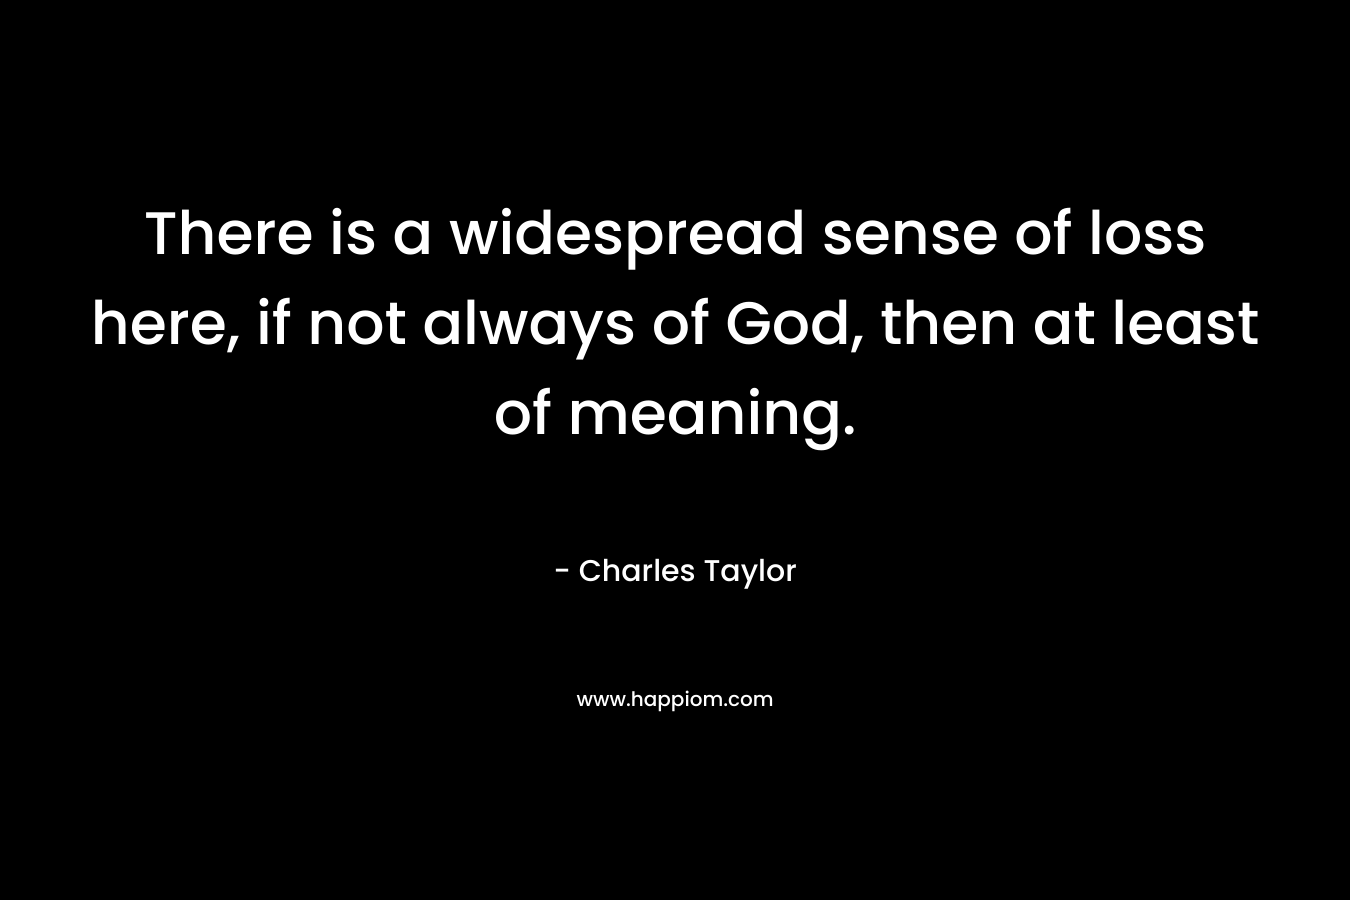 There is a widespread sense of loss here, if not always of God, then at least of meaning. – Charles Taylor